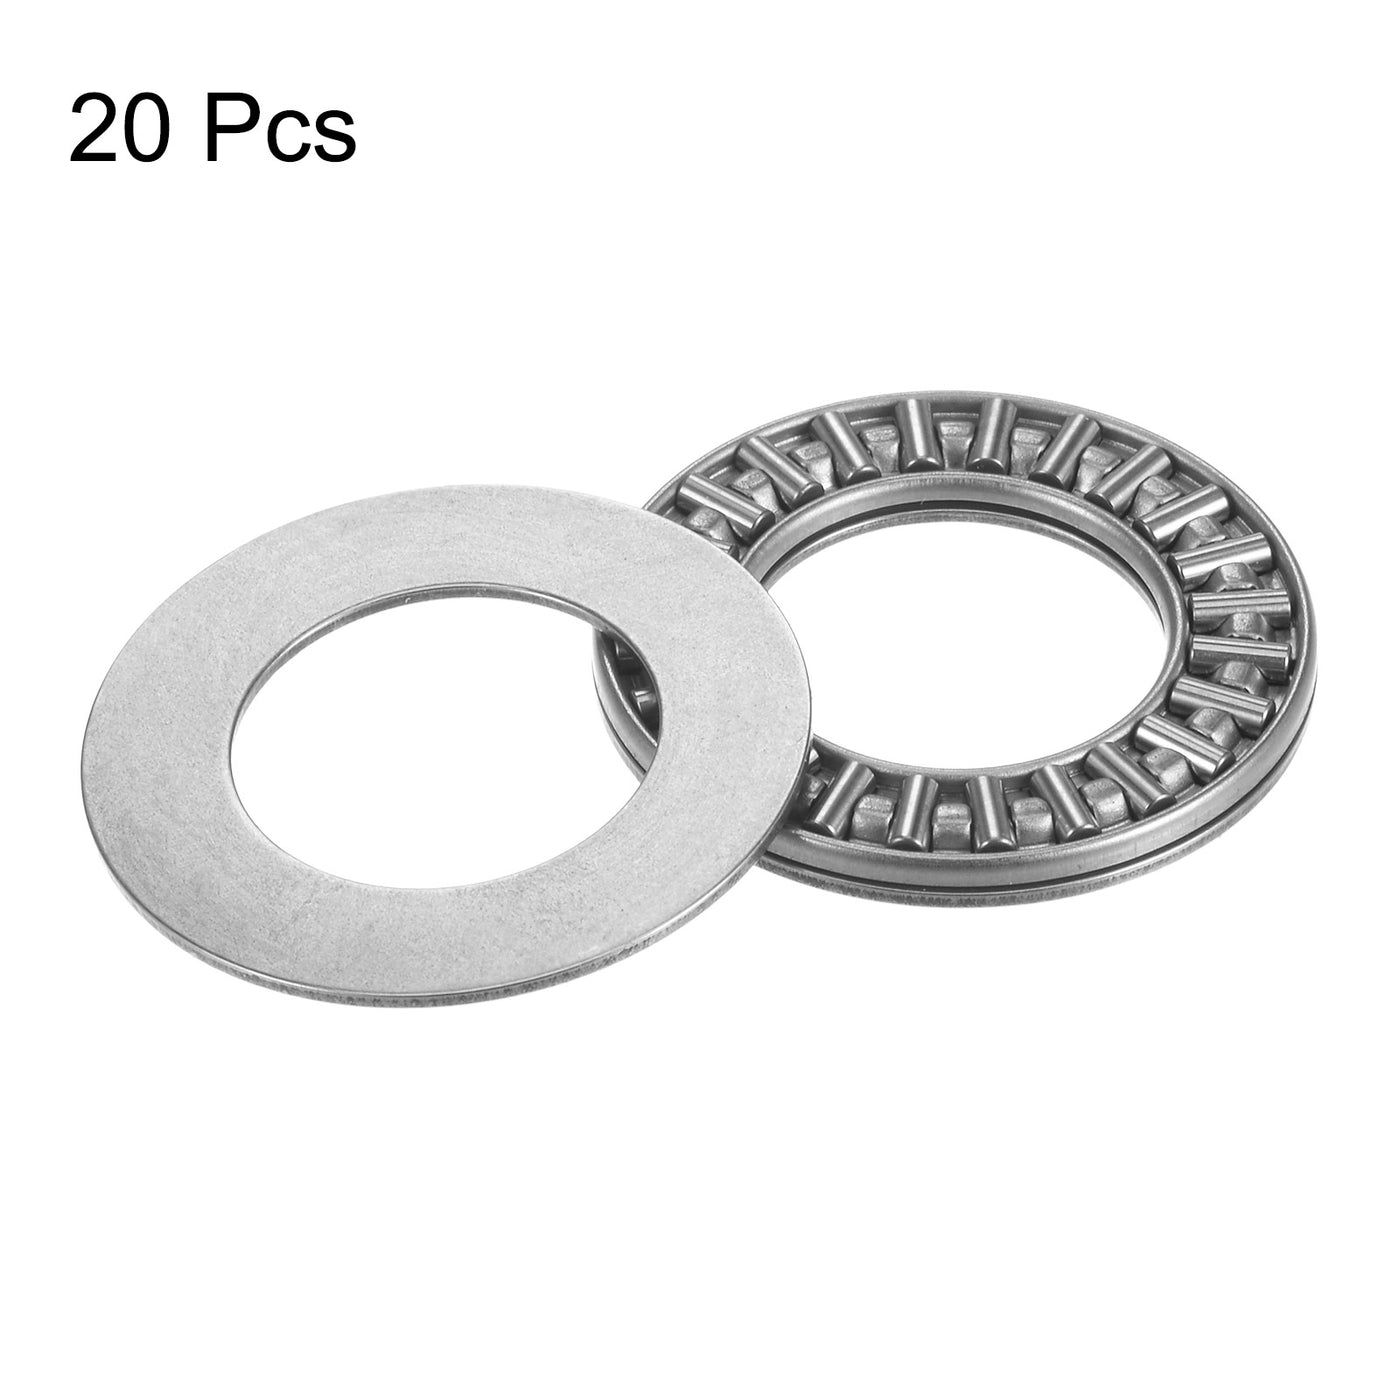 uxcell Uxcell AXK2035 Thrust Needle Roller Bearings 20x35x2mm with AS2035 Washers 20pcs